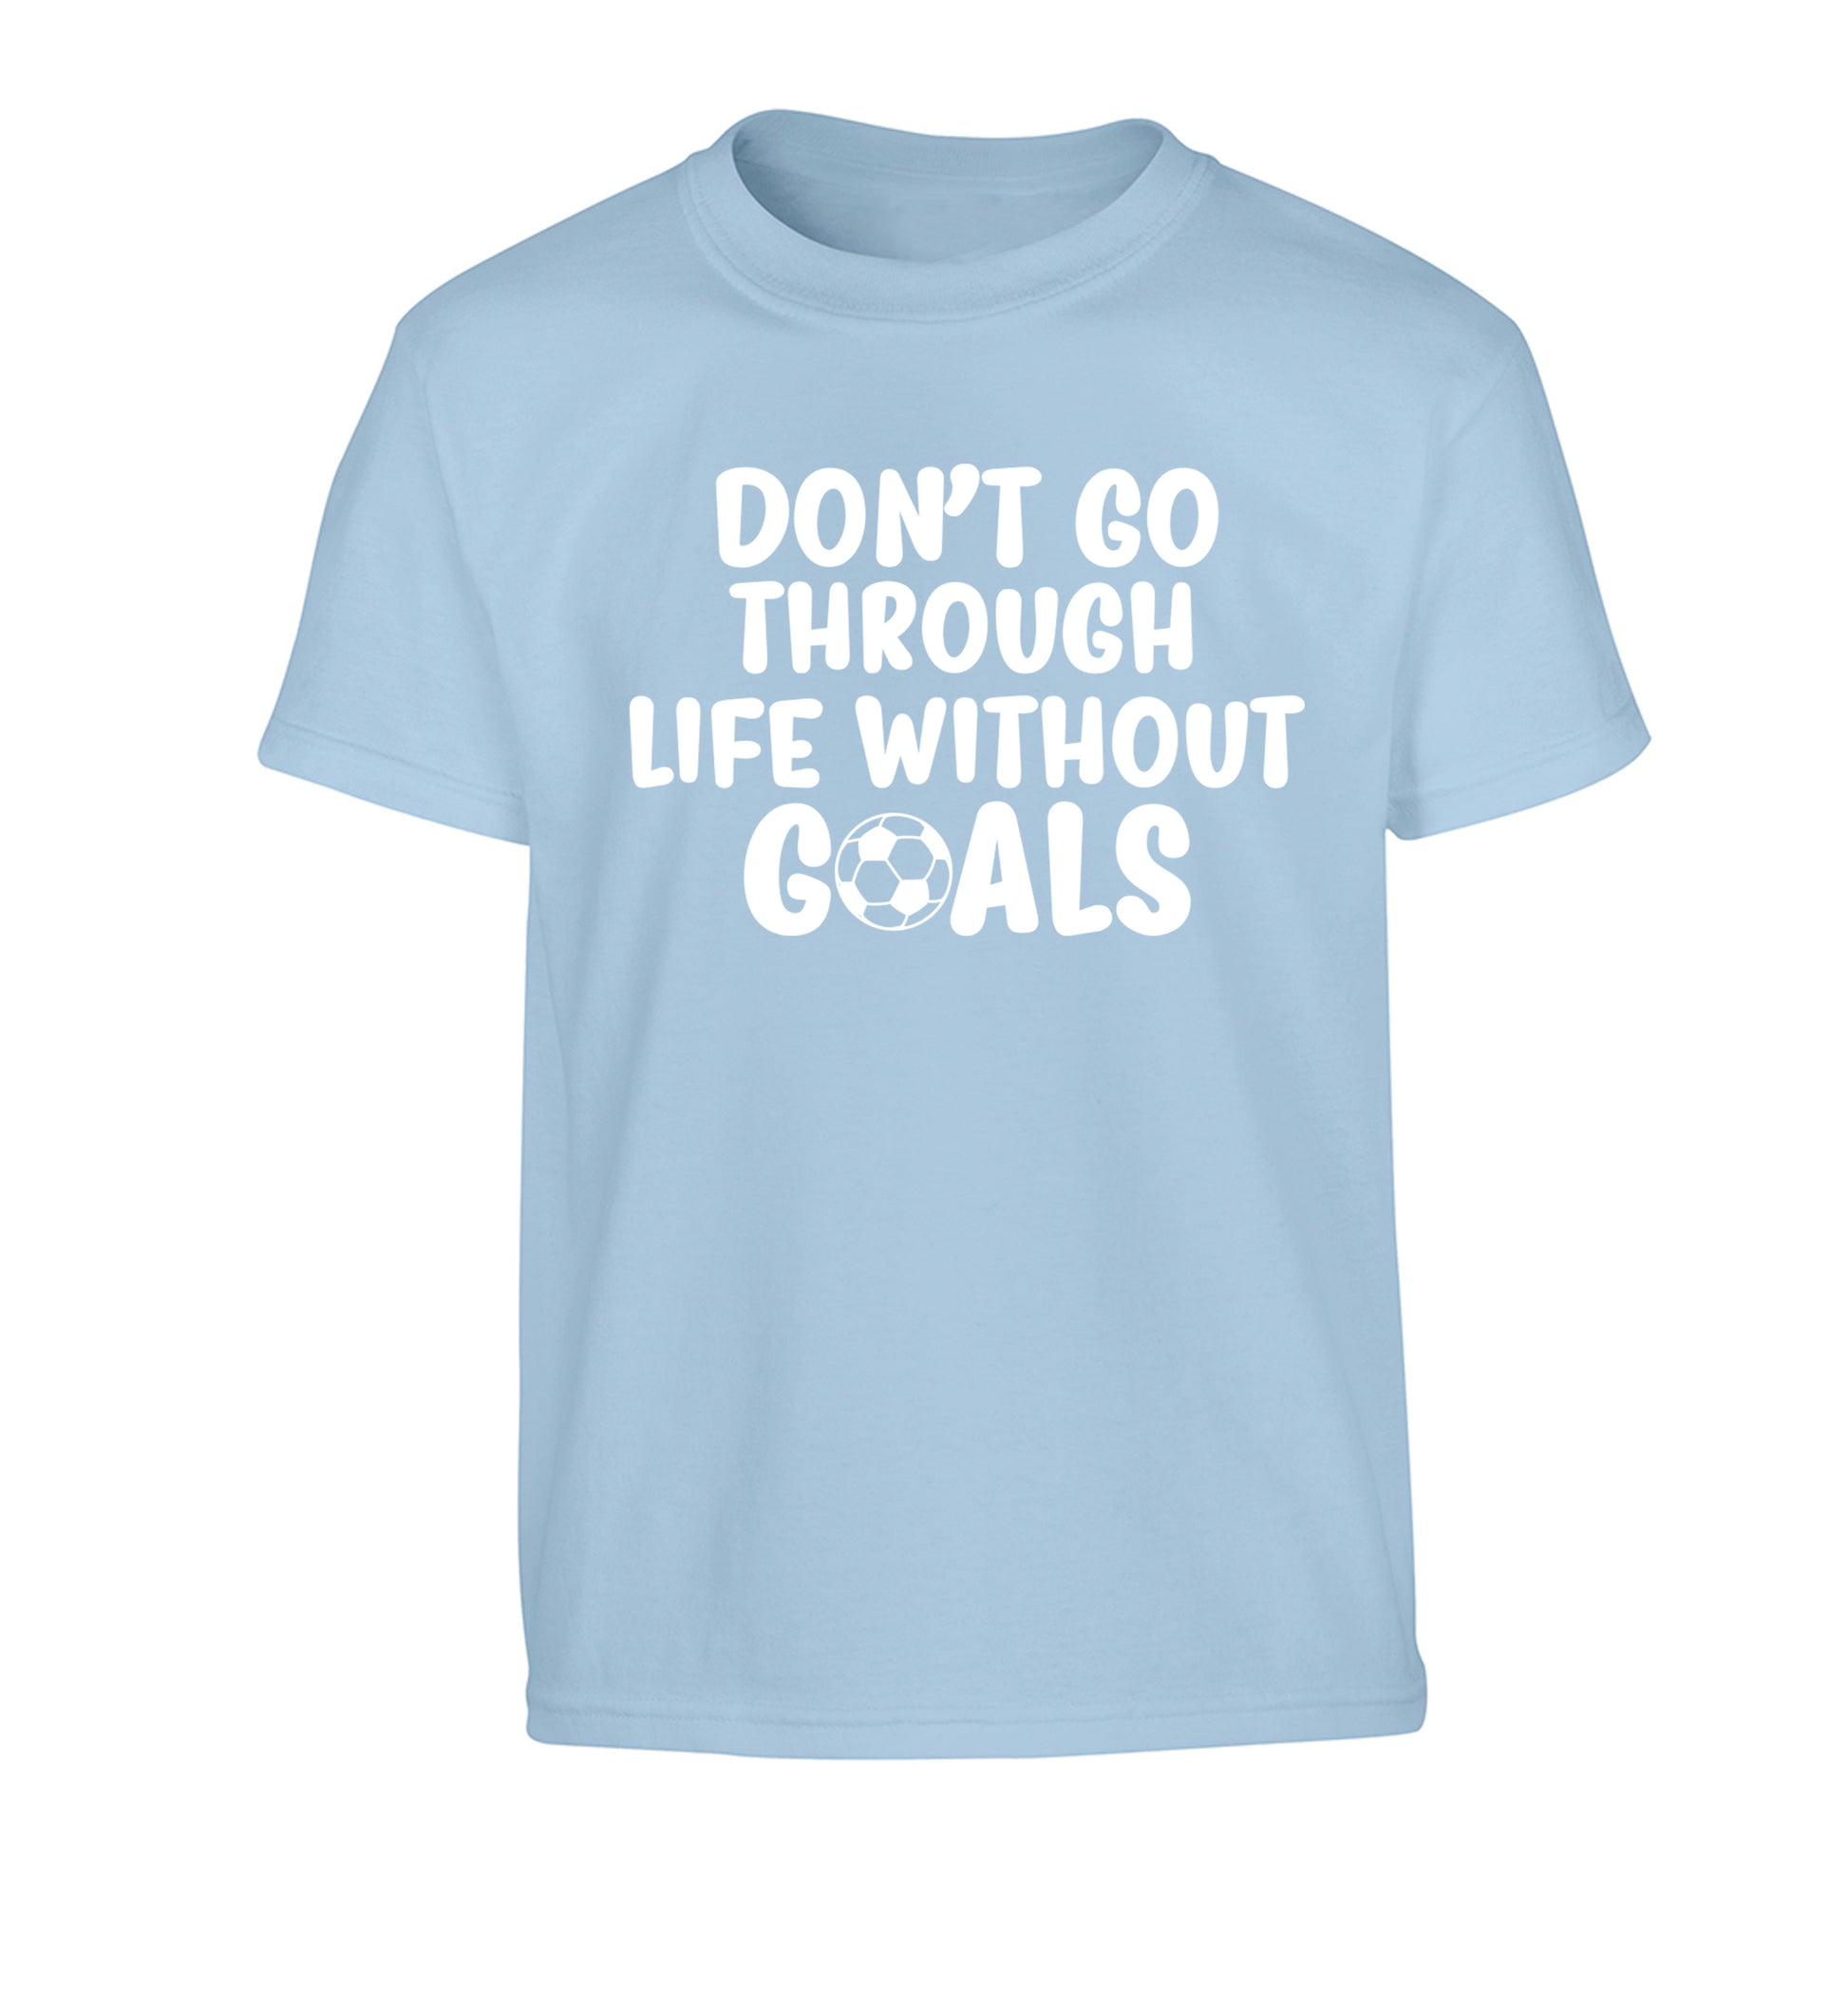 Don't go through life without goals Children's light blue Tshirt 12-14 Years